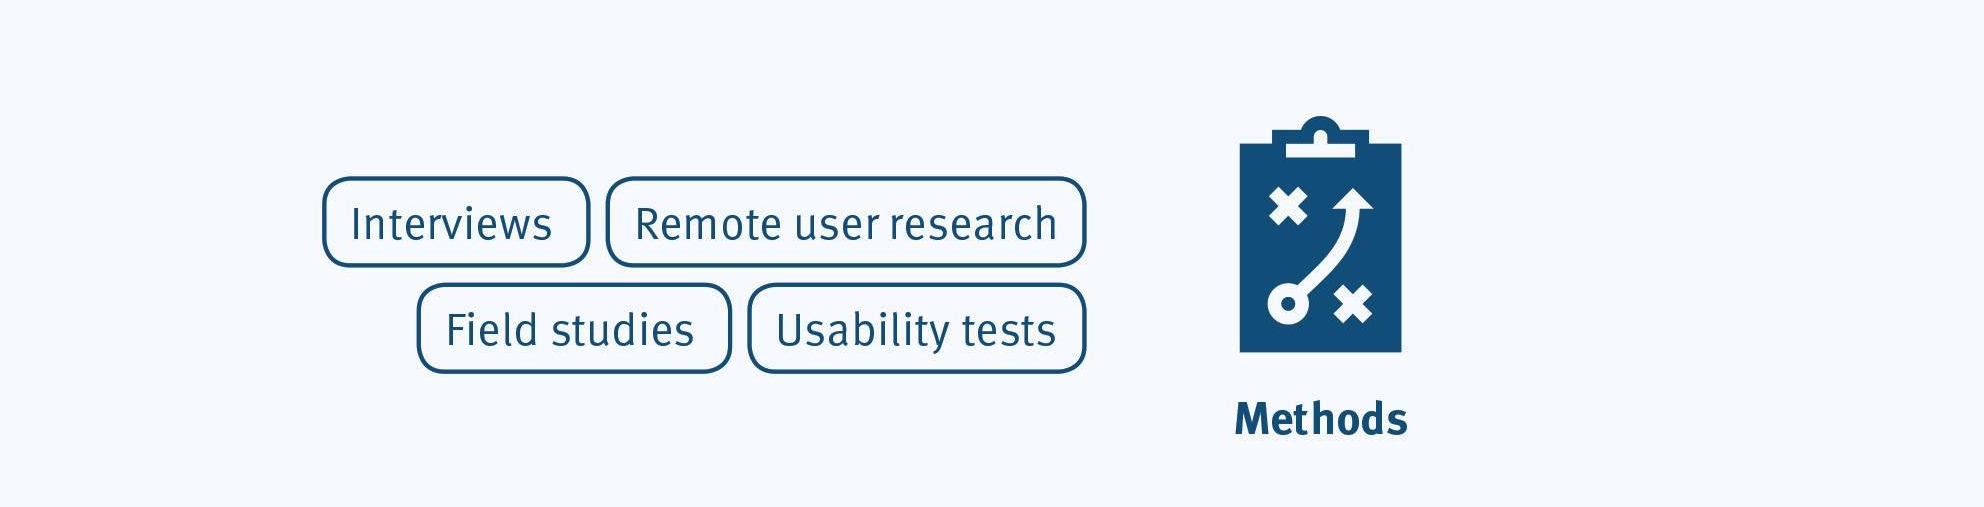 How to conduct user research | in a B2B context 2